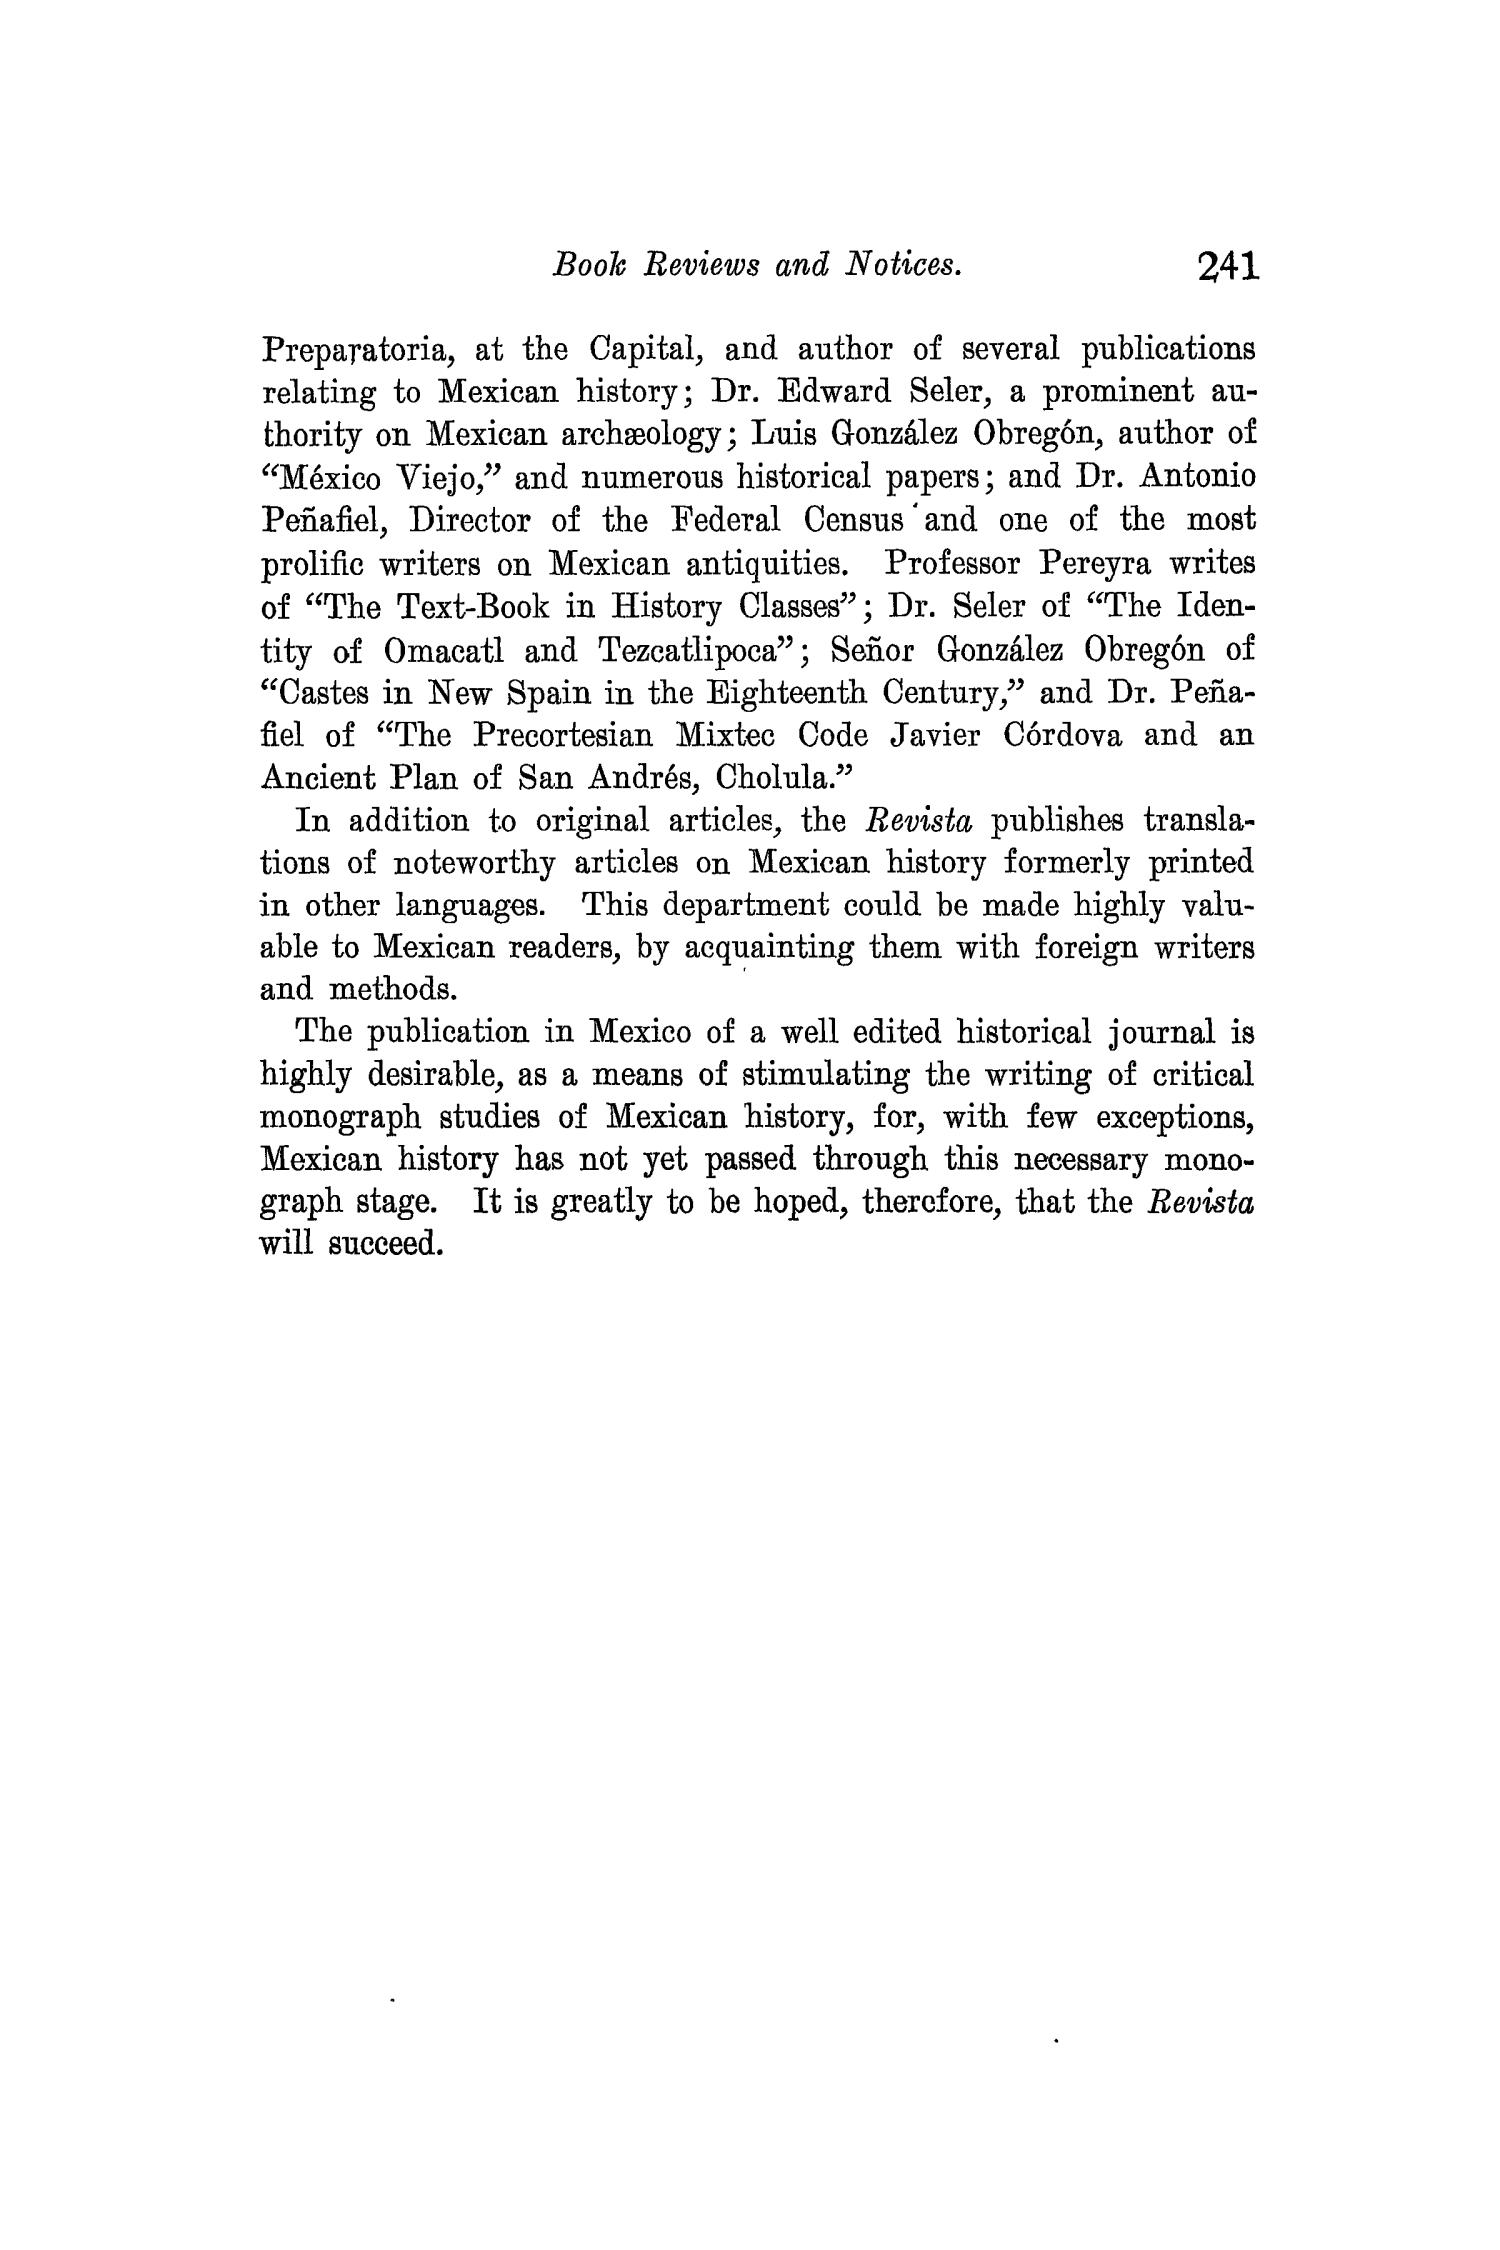 The Quarterly of the Texas State Historical Association, Volume 11, July 1907 - April, 1908
                                                
                                                    241
                                                